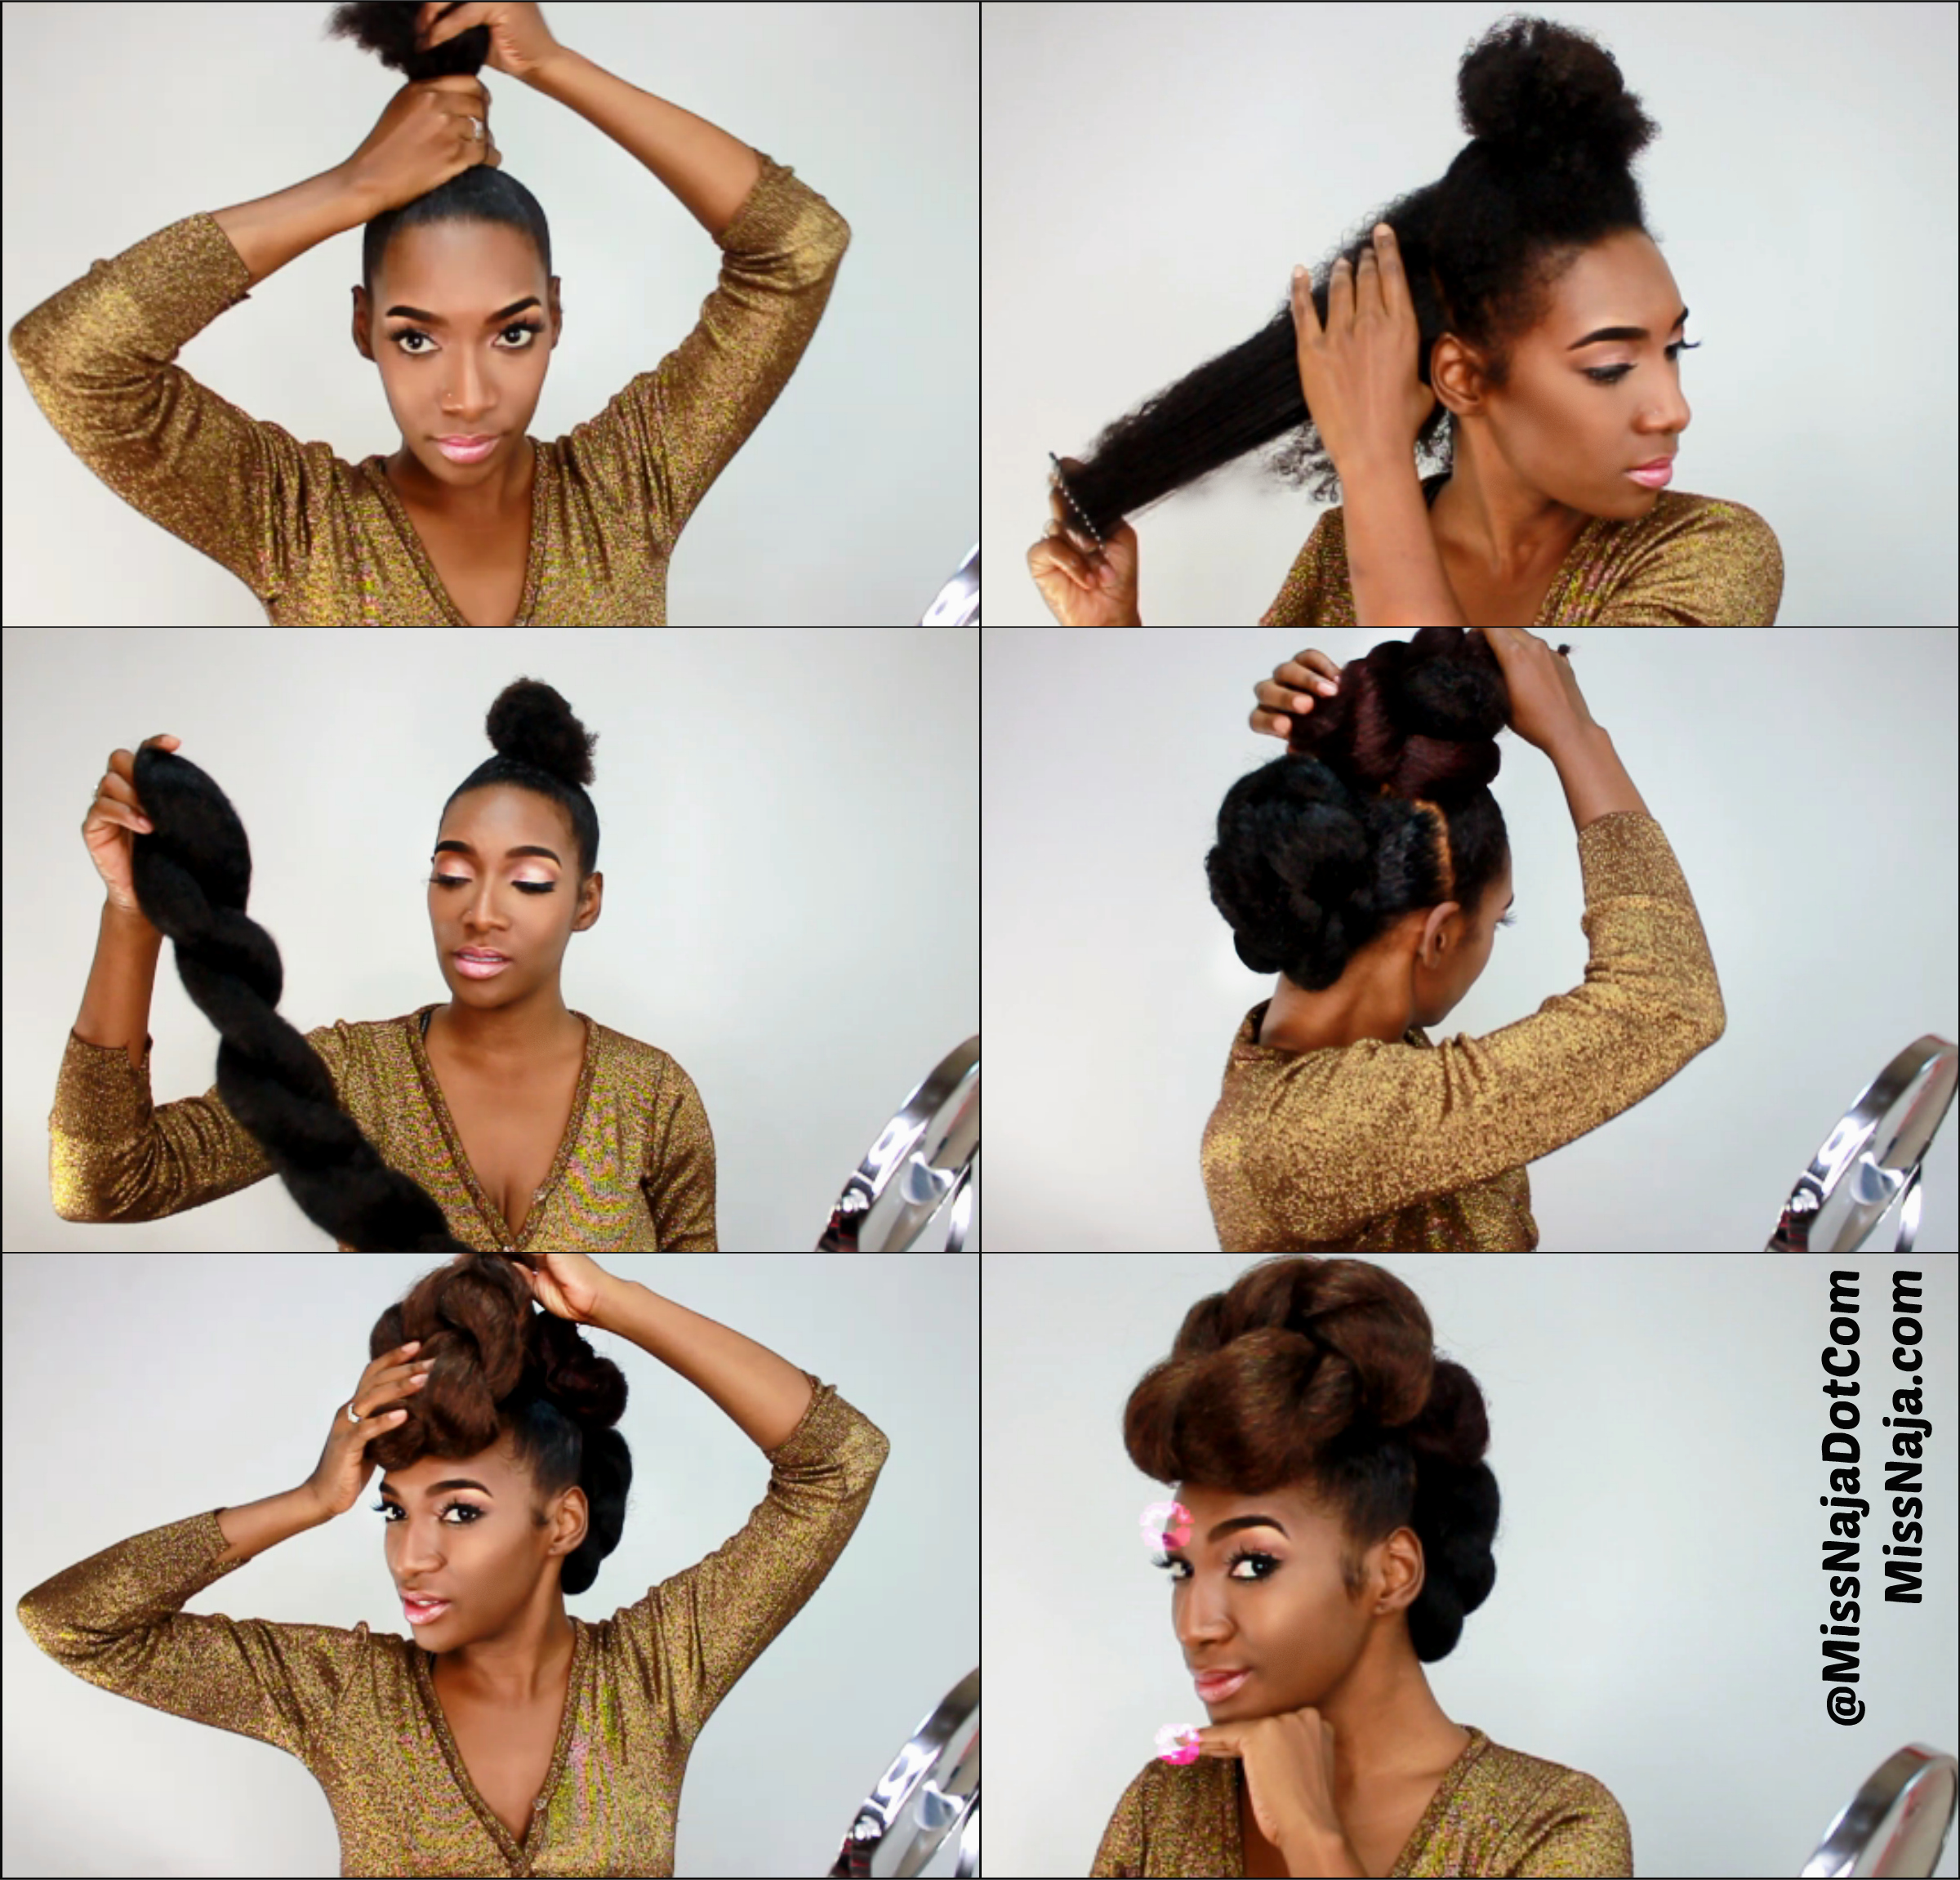 10 Things Natural Hair Bloggers Want You to Know About Protective